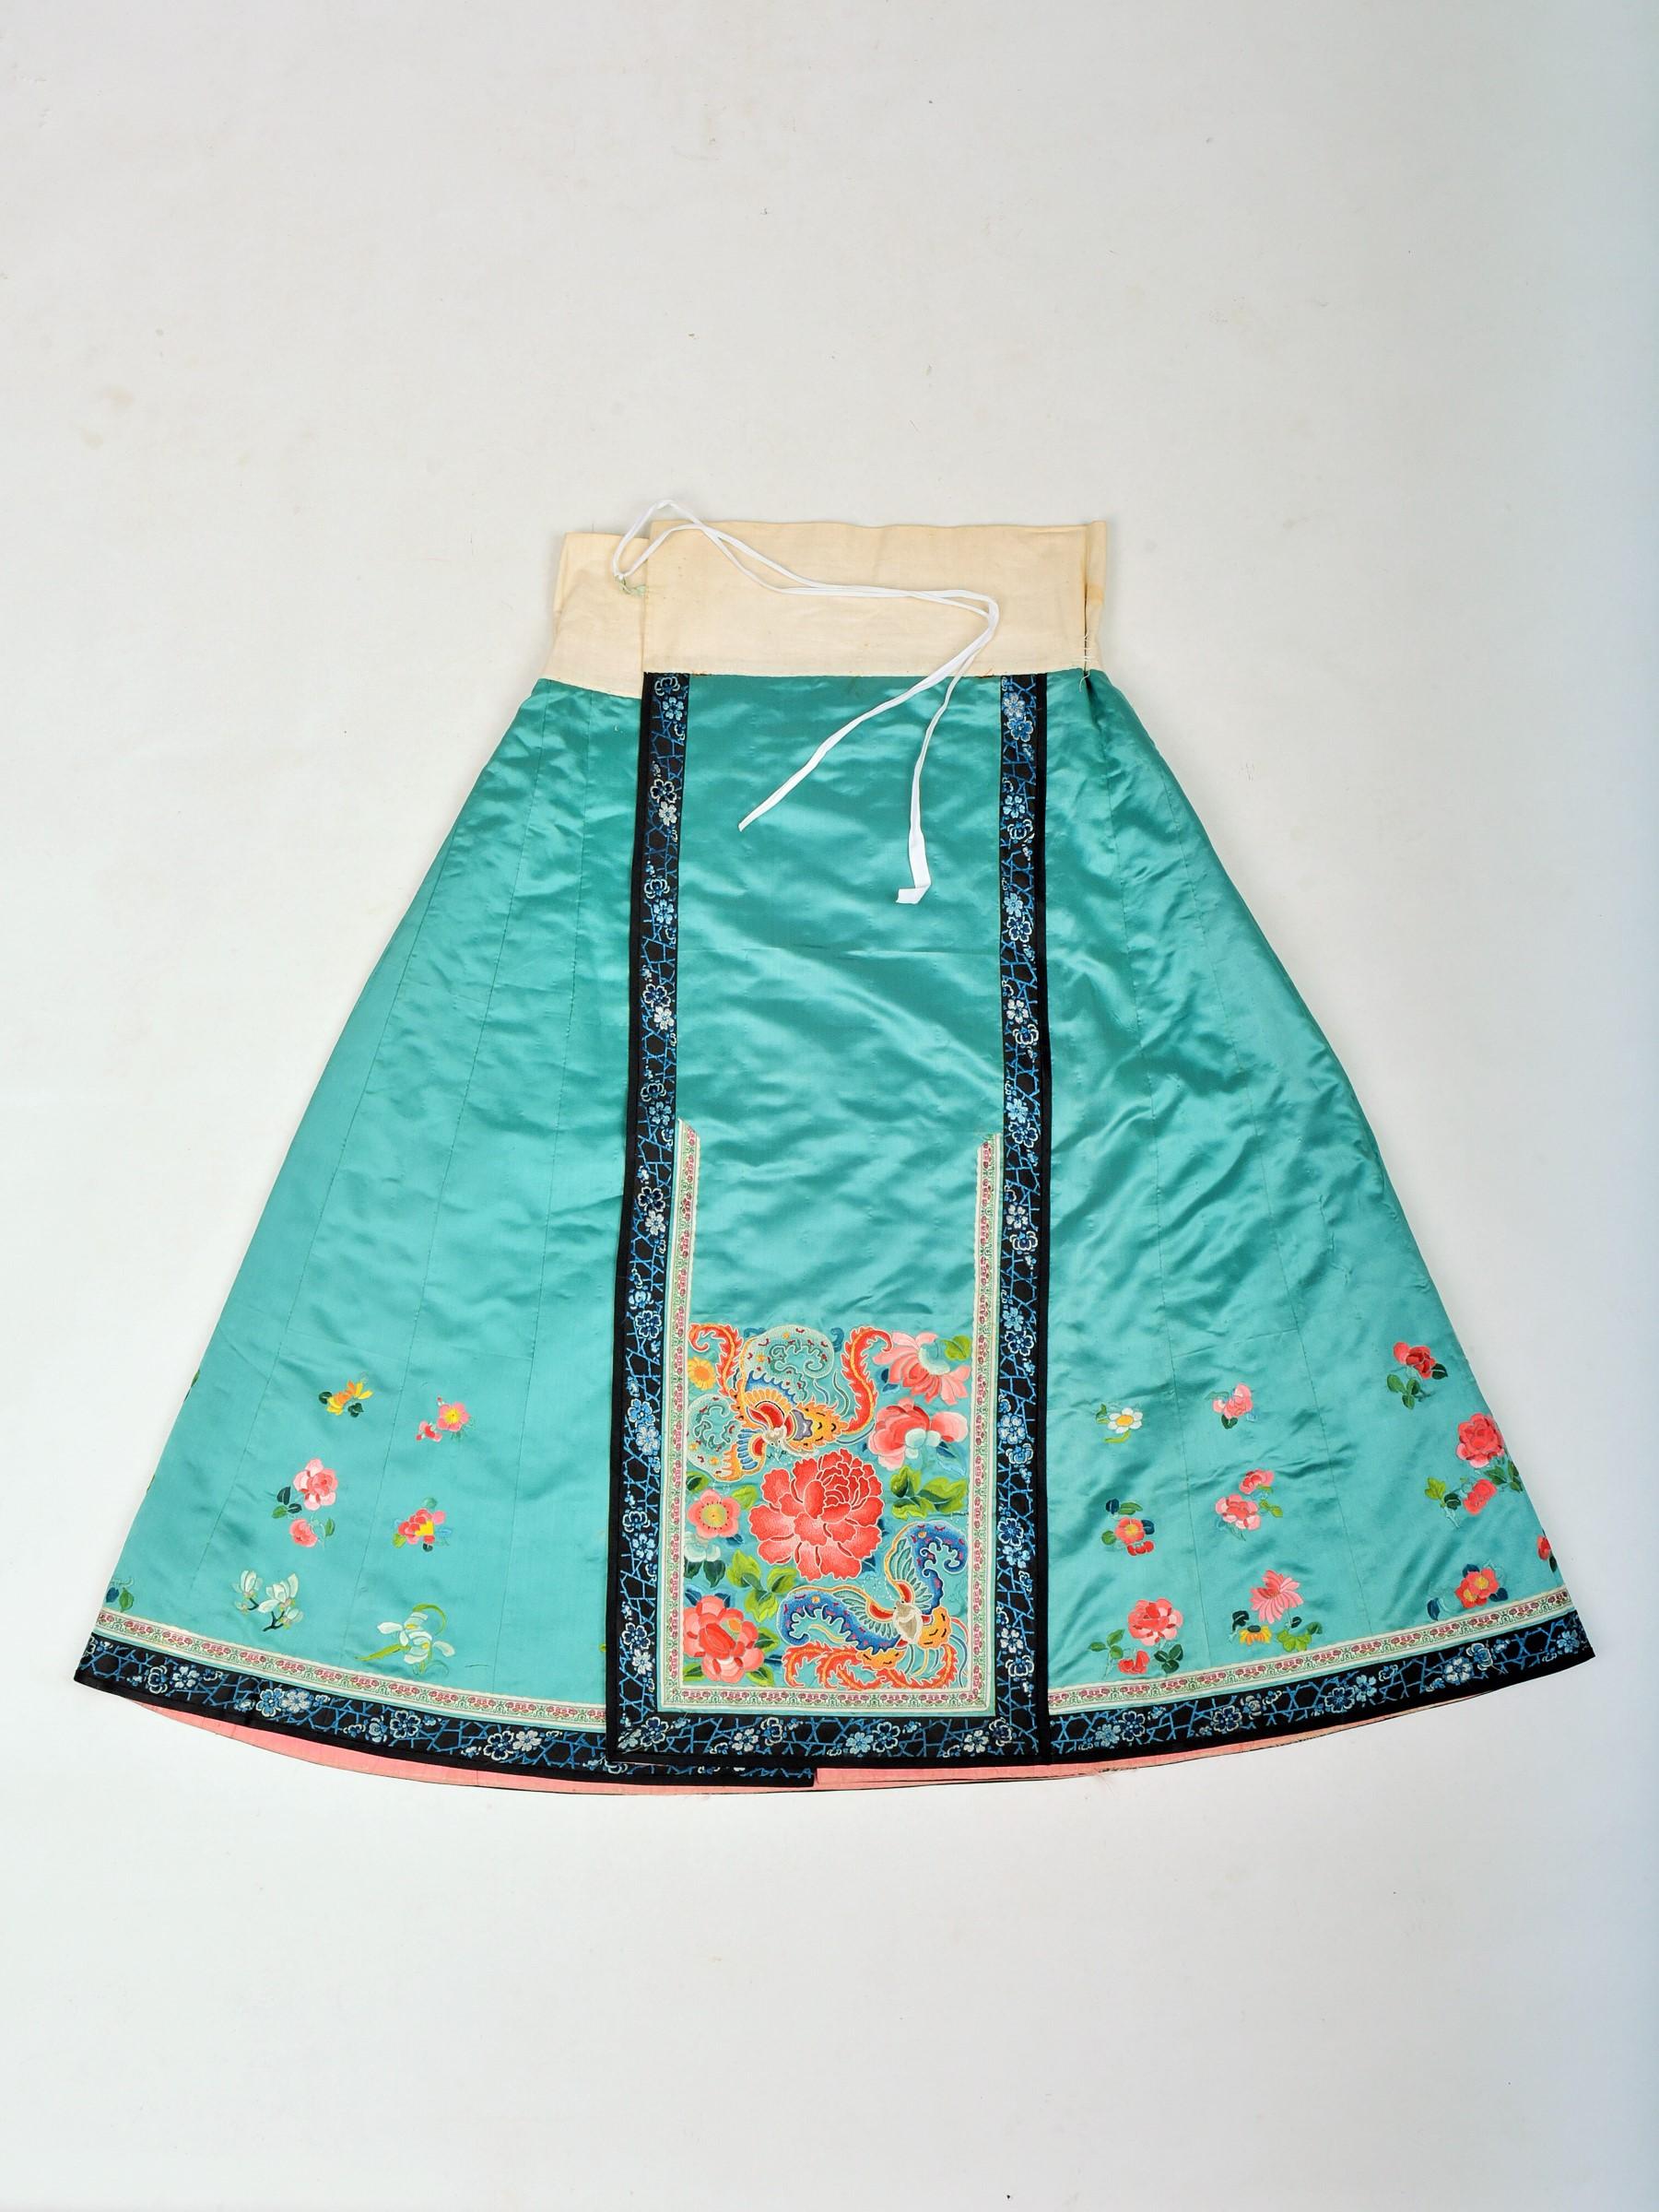 Semi Formal Silk Embroidered Manchu Woman's Skirt and Dress Qing period C.1900 2